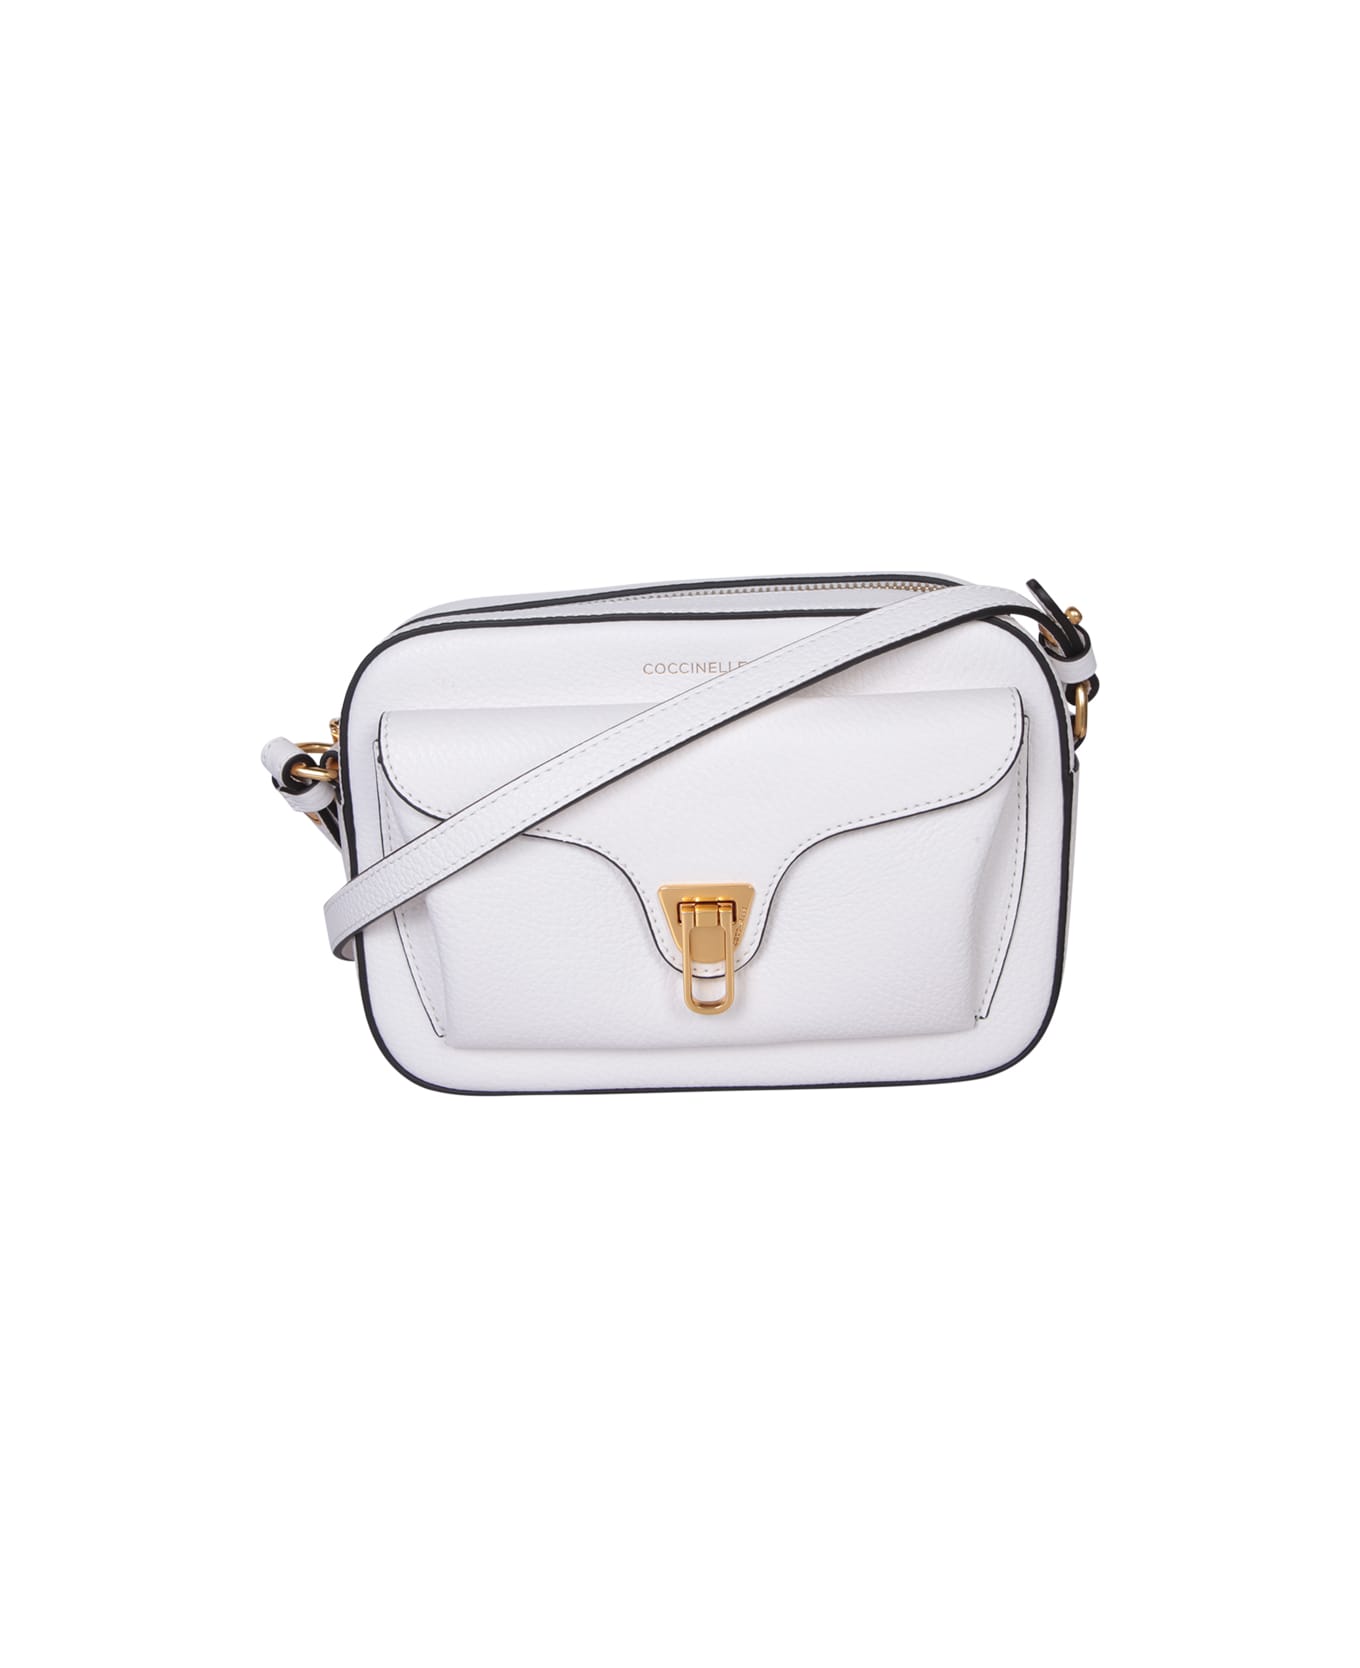 Coccinelle Beat Soft White Bag - White ショルダーバッグ